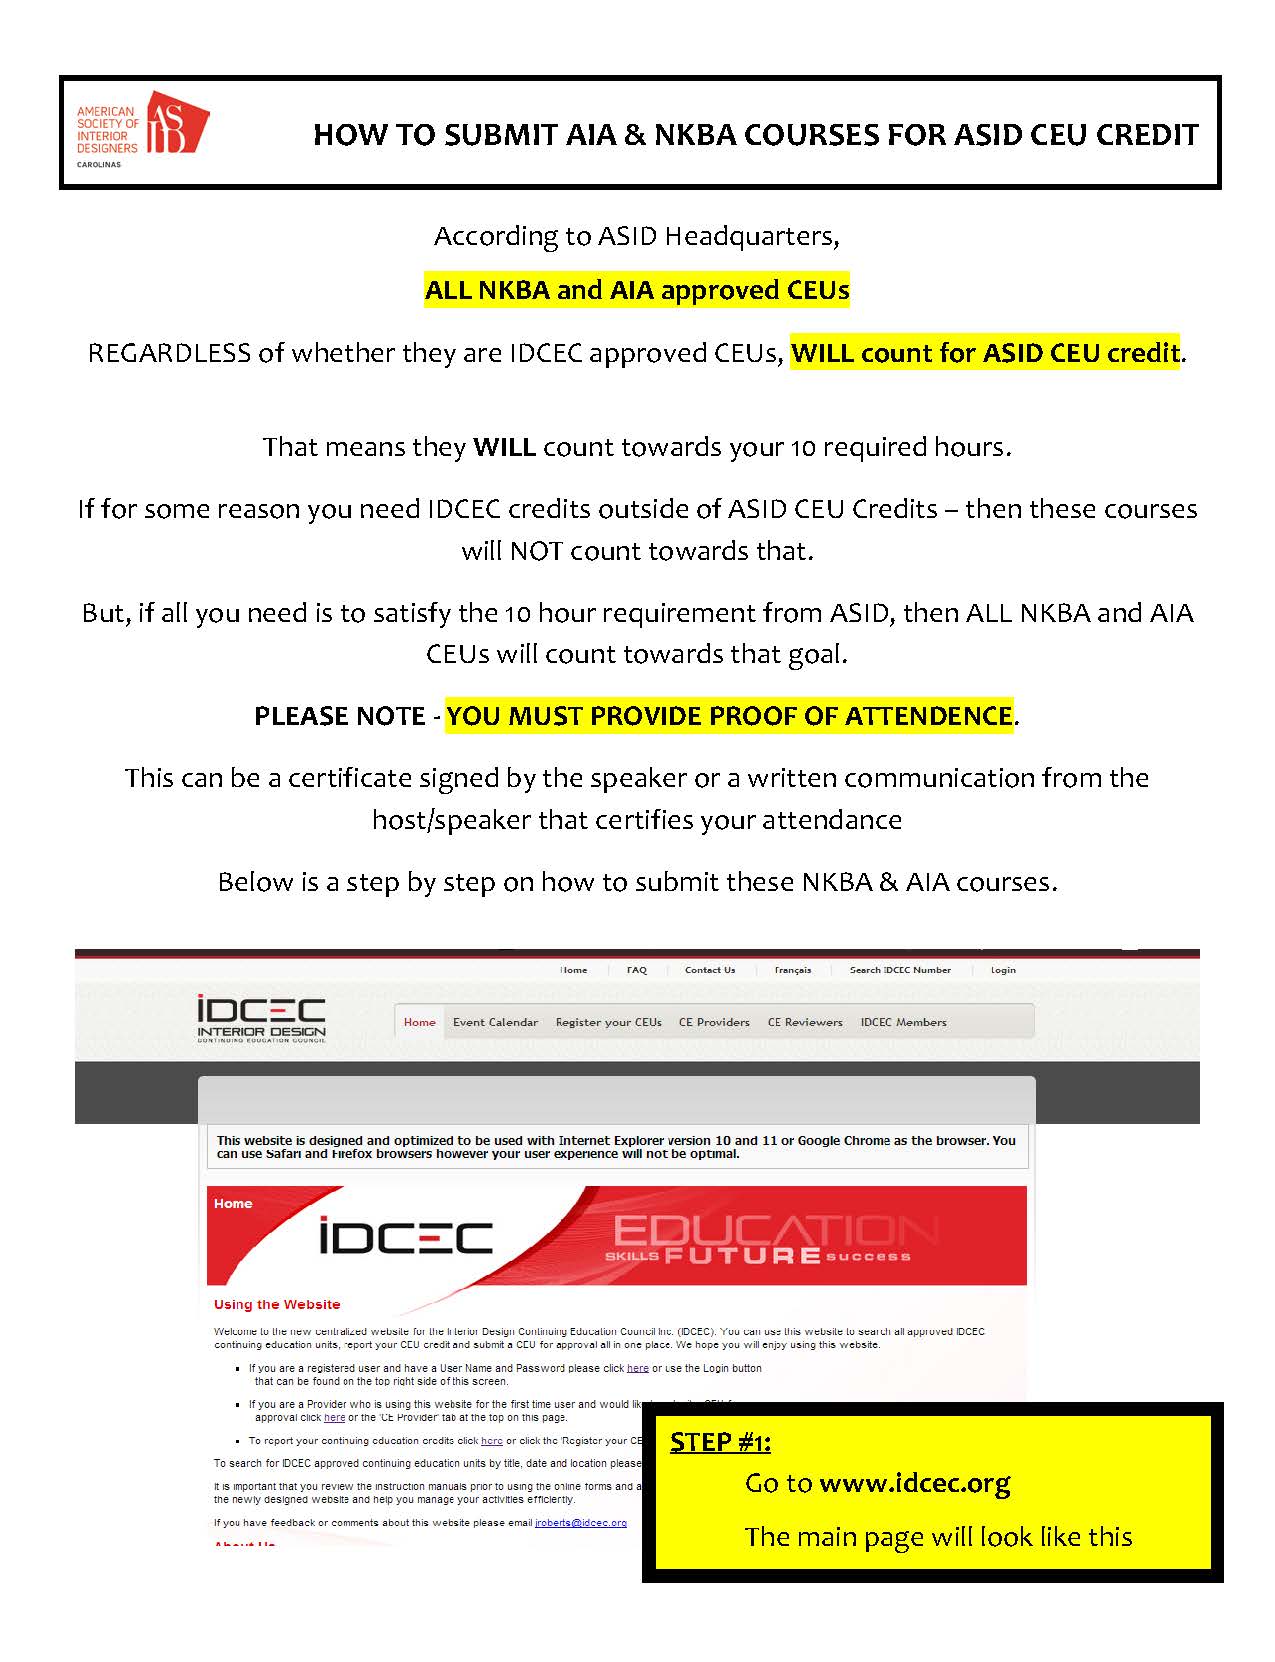 HOW TO SUBMIT AIA  NKBA COURSES FOR ASID CEU CREDIT Page 01